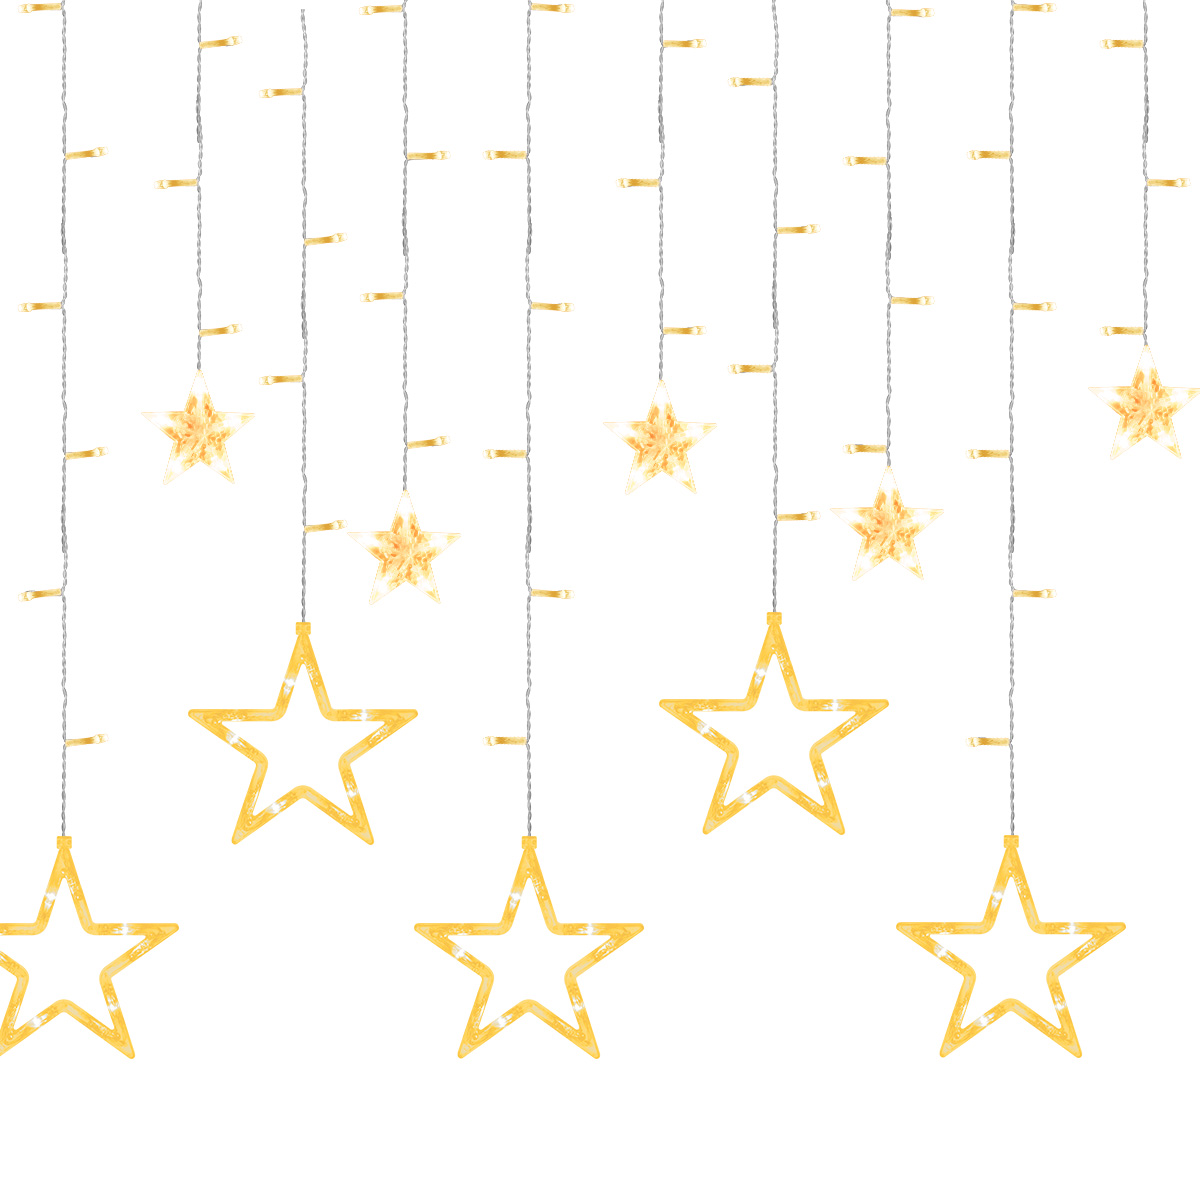 GDEALER Twinkle Star 12 Stars 138 LED Curtain String Lights, Window Curtain Lights Fairy Lights for Wedding Party Bedroom,Hanging Lights Twinkle Lights Christmas Lights Wall Decor Warm White 